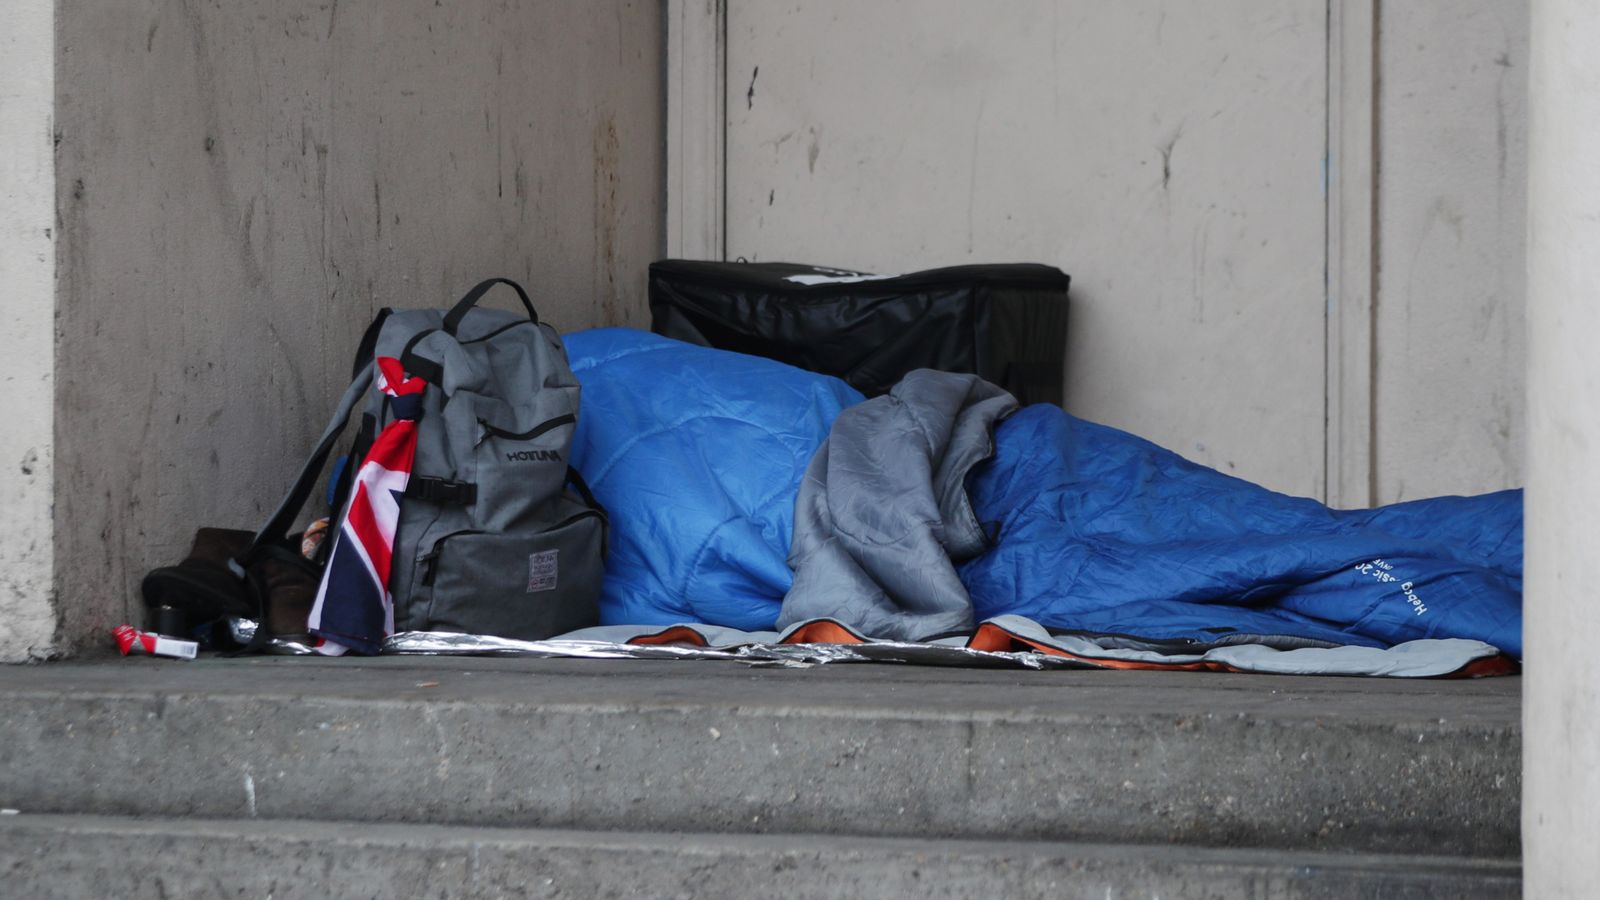 More than 300,000 people homeless in England for Christmas, Shelter claims